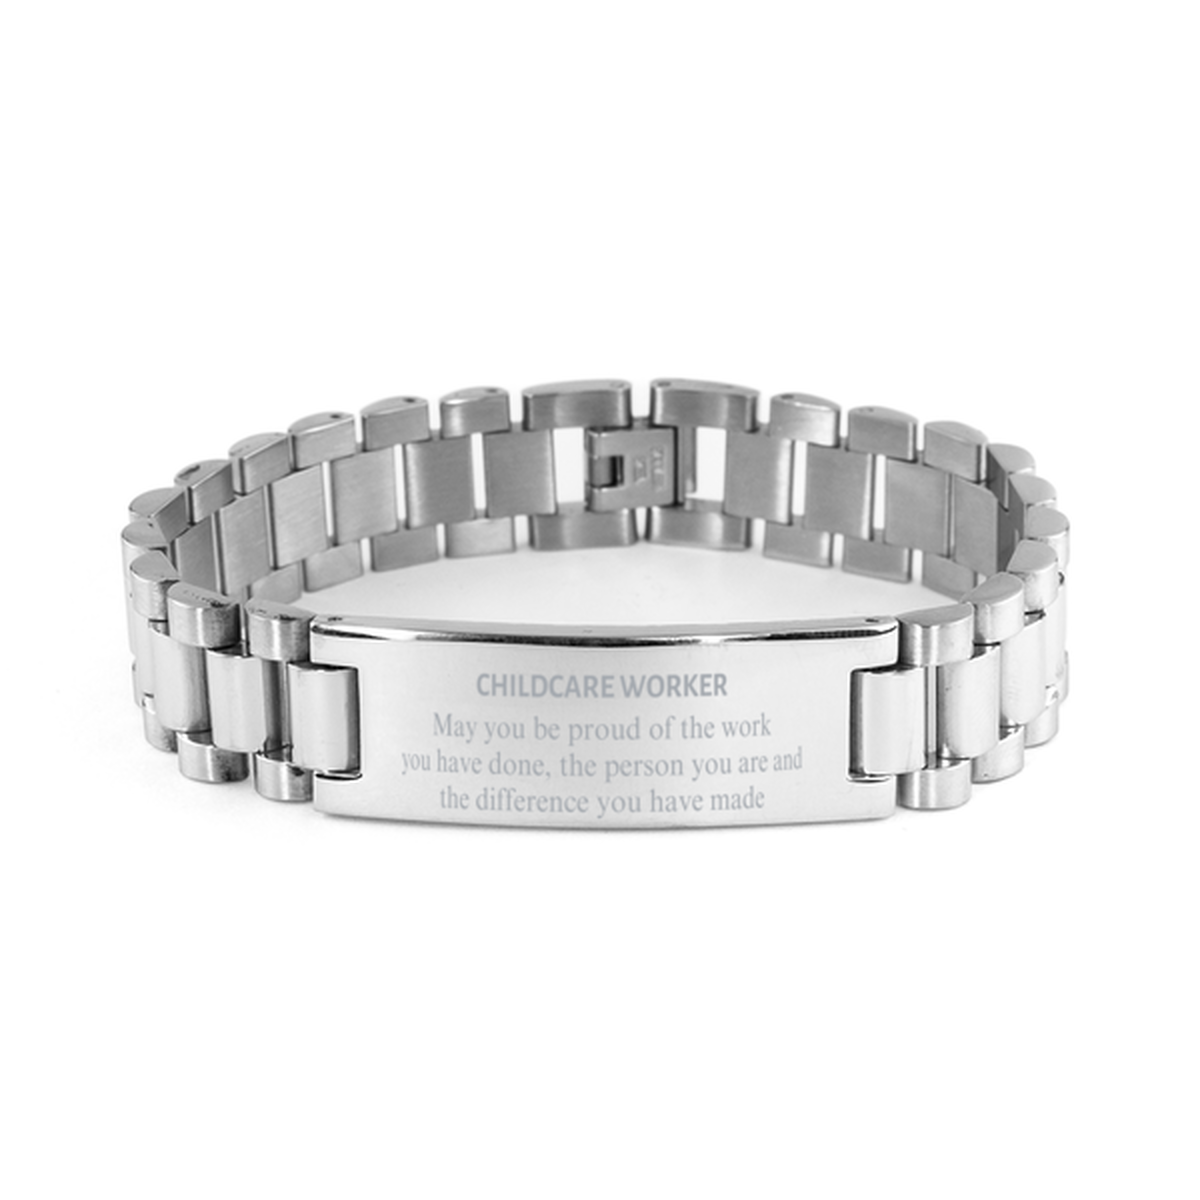 Childcare Worker May you be proud of the work you have done, Retirement Childcare Worker Ladder Stainless Steel Bracelet for Colleague Appreciation Gifts Amazing for Childcare Worker